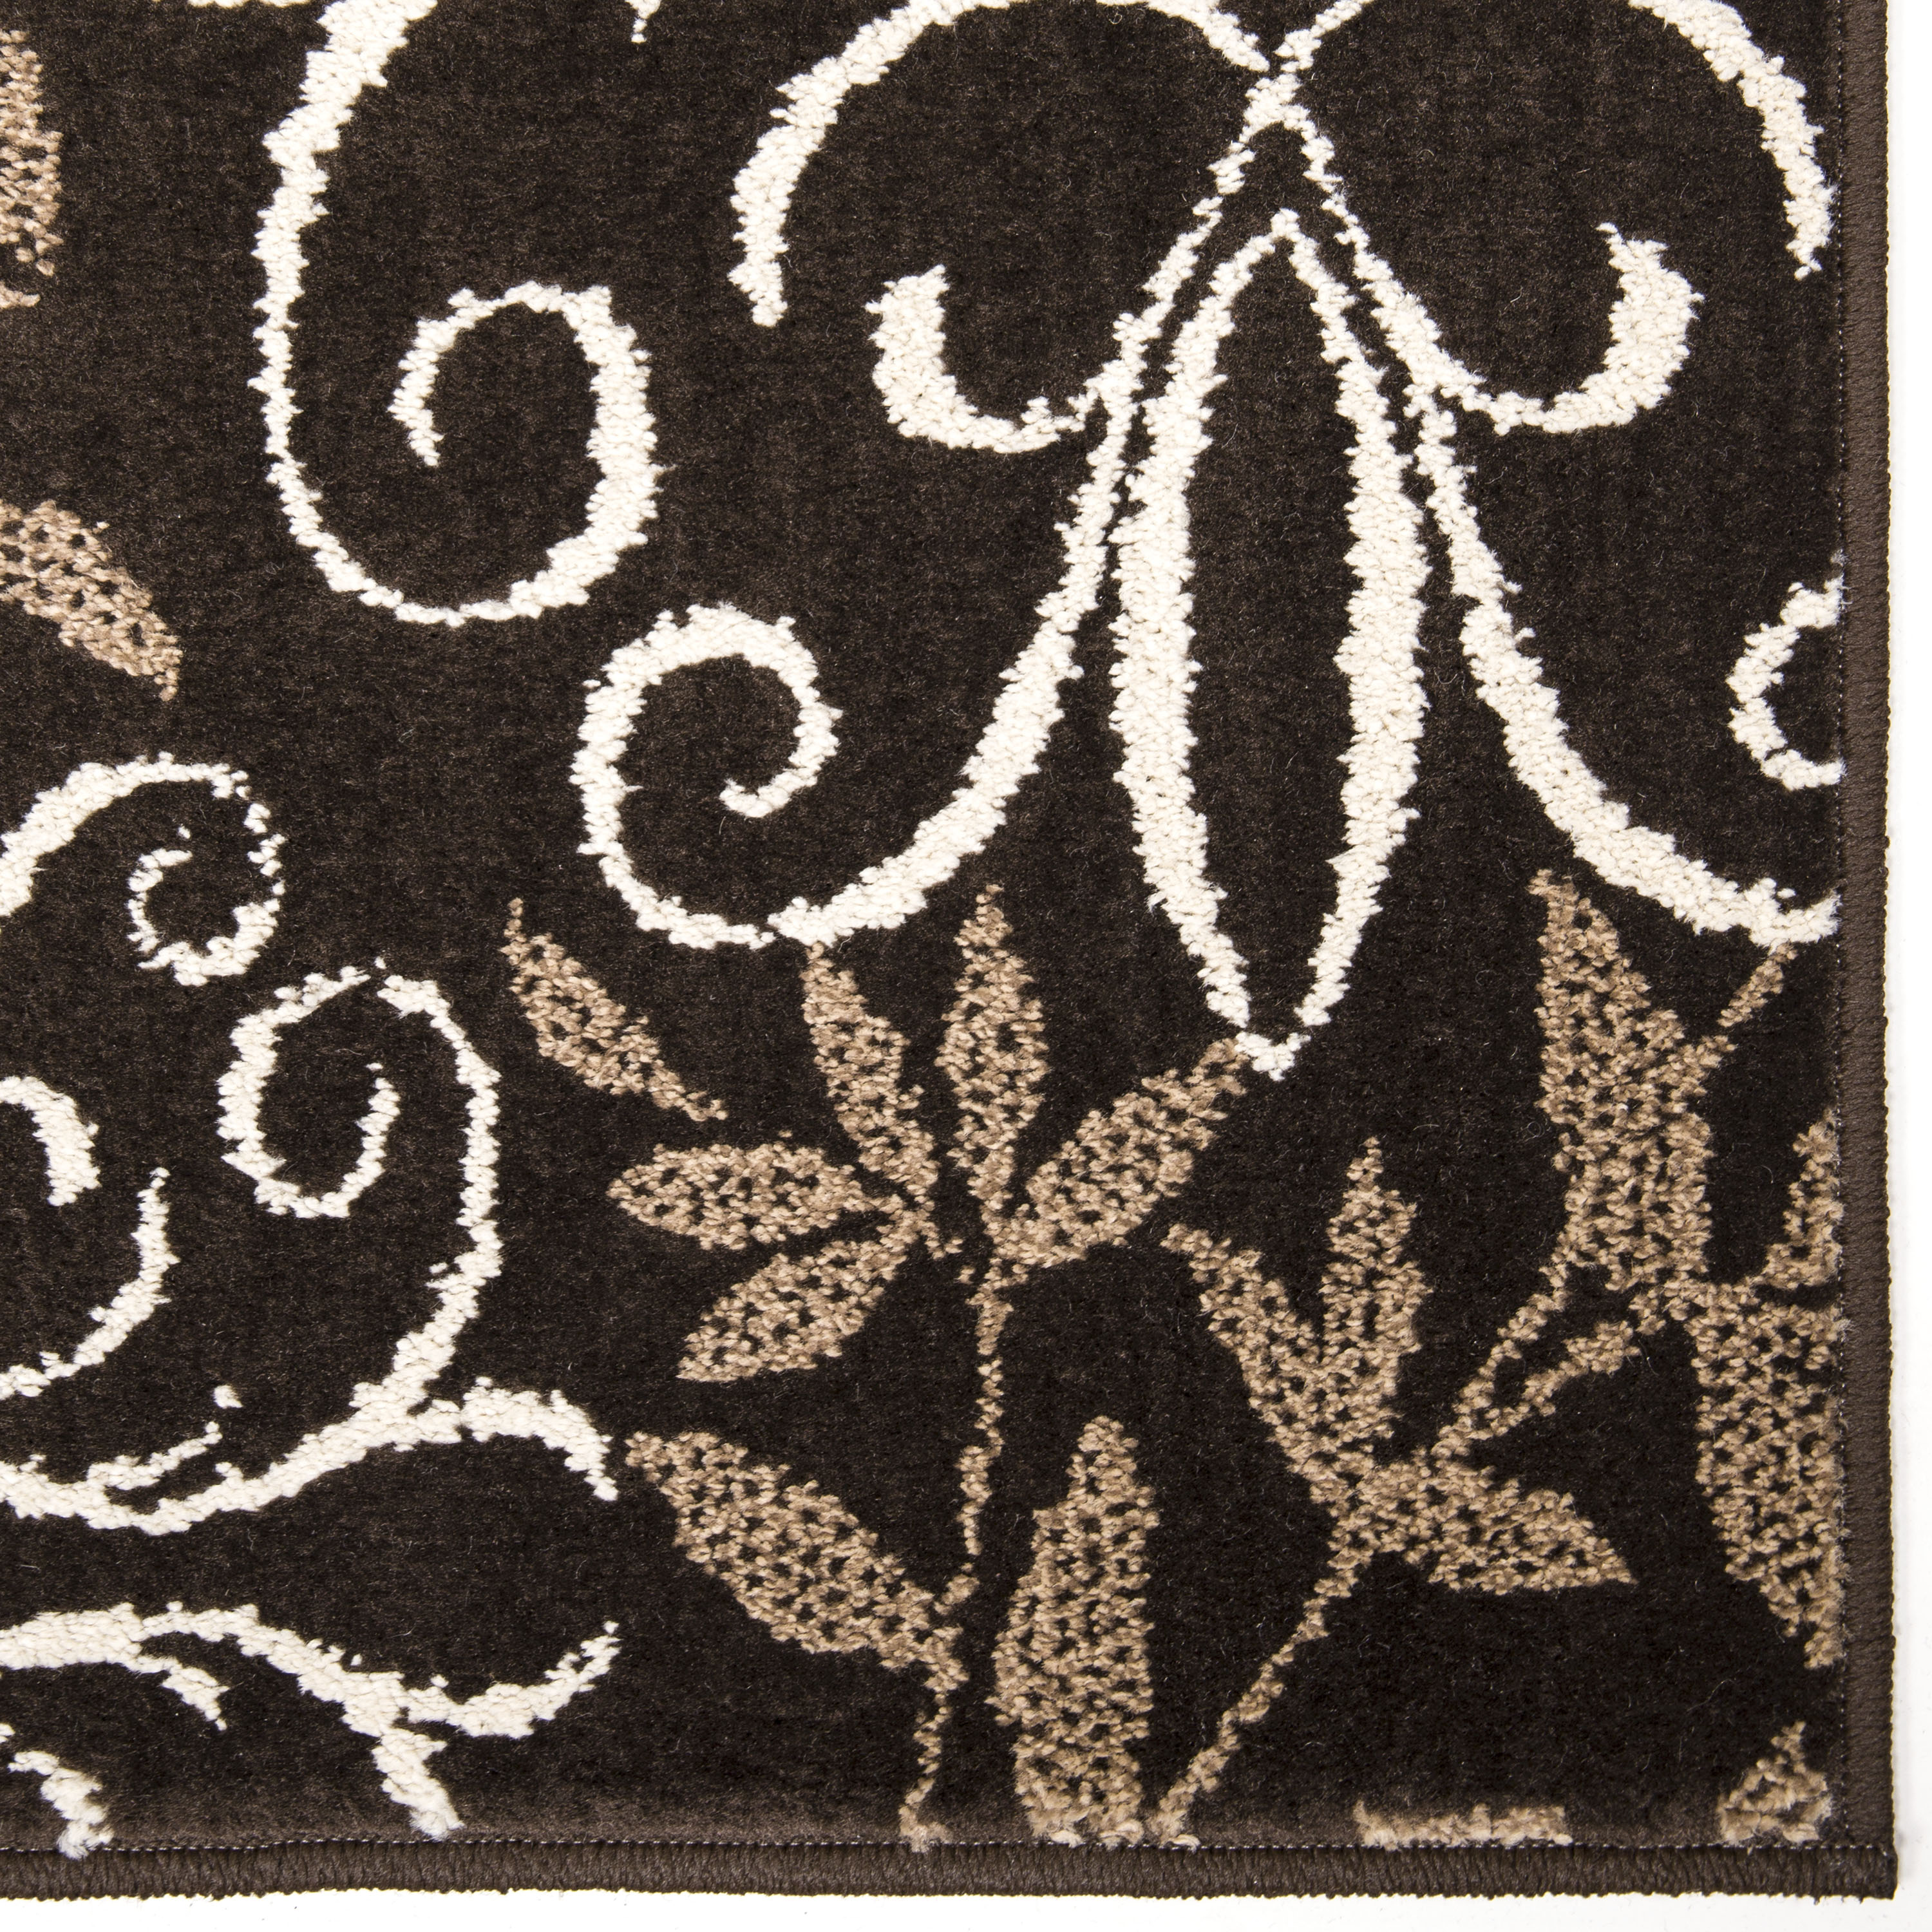 Better Homes & Gardens Iron Fleur Area Rug, Brown, 7'6" x 9'6" - image 5 of 9